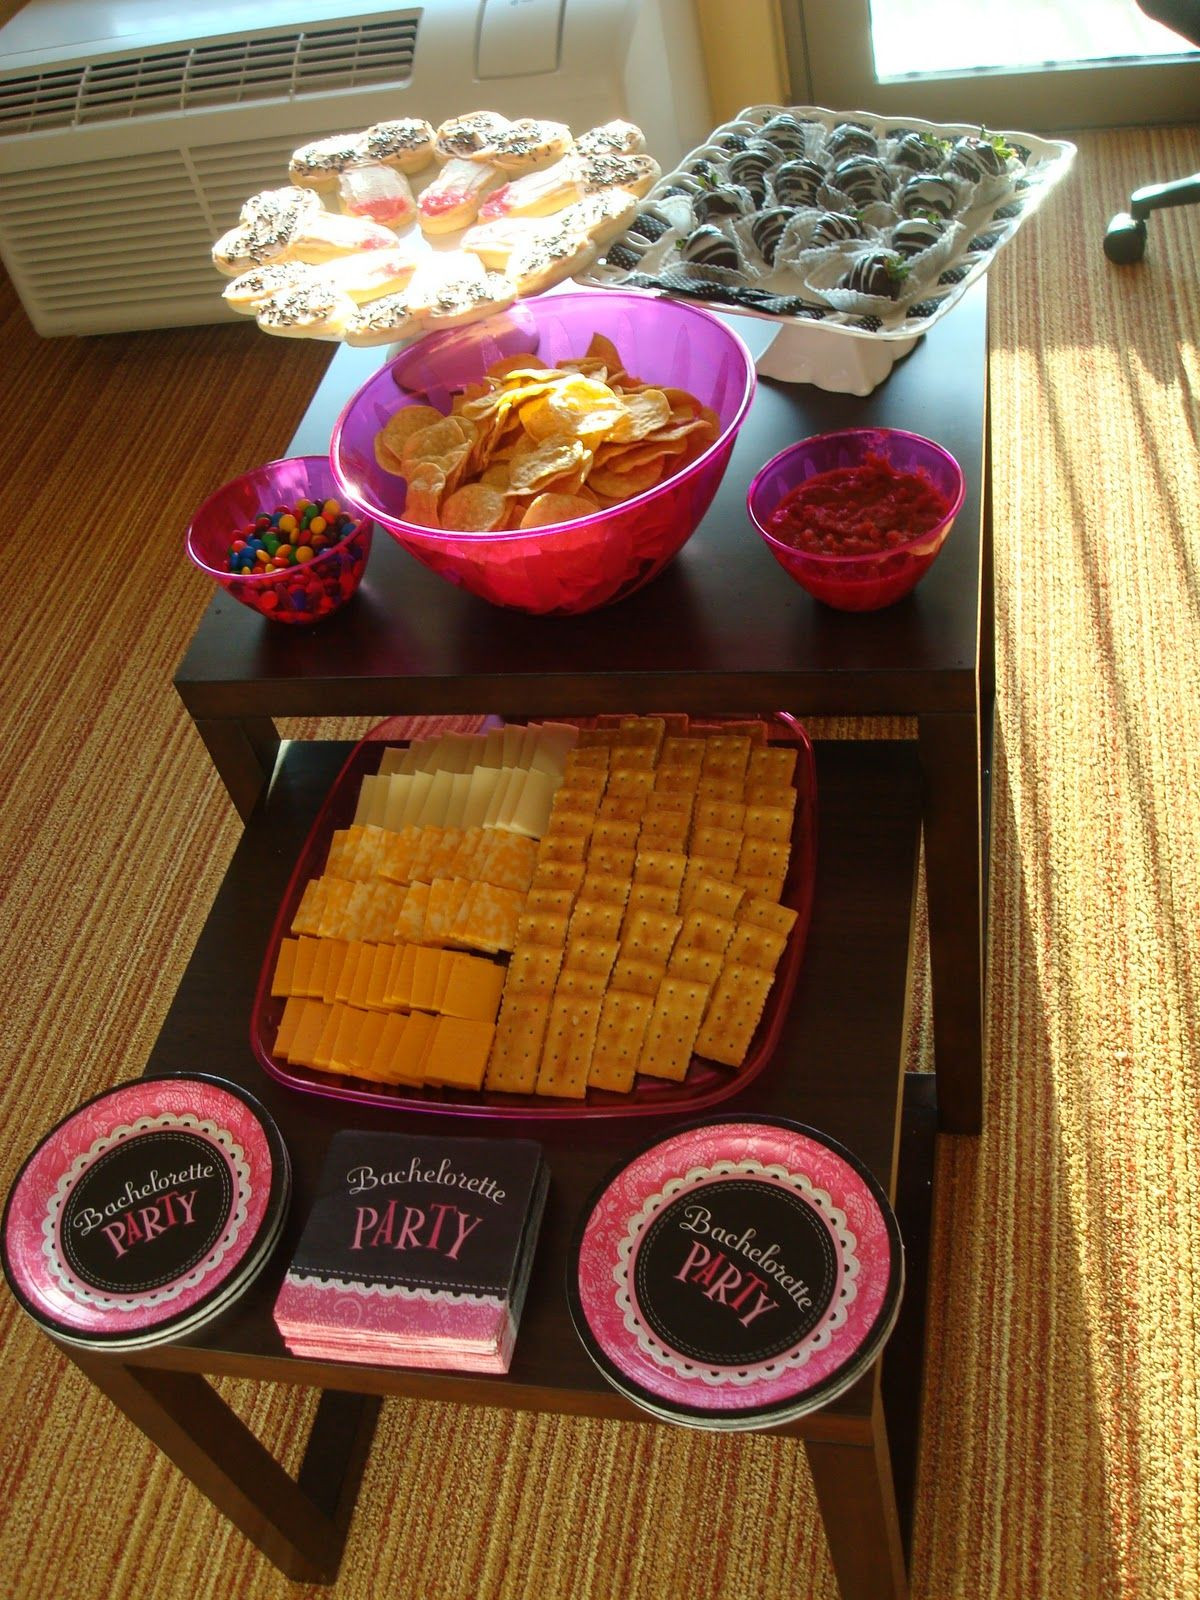 Bachelorette Party Snacks Ideas
 Bachelorette Party Weekend Hot Pink Black and Silver